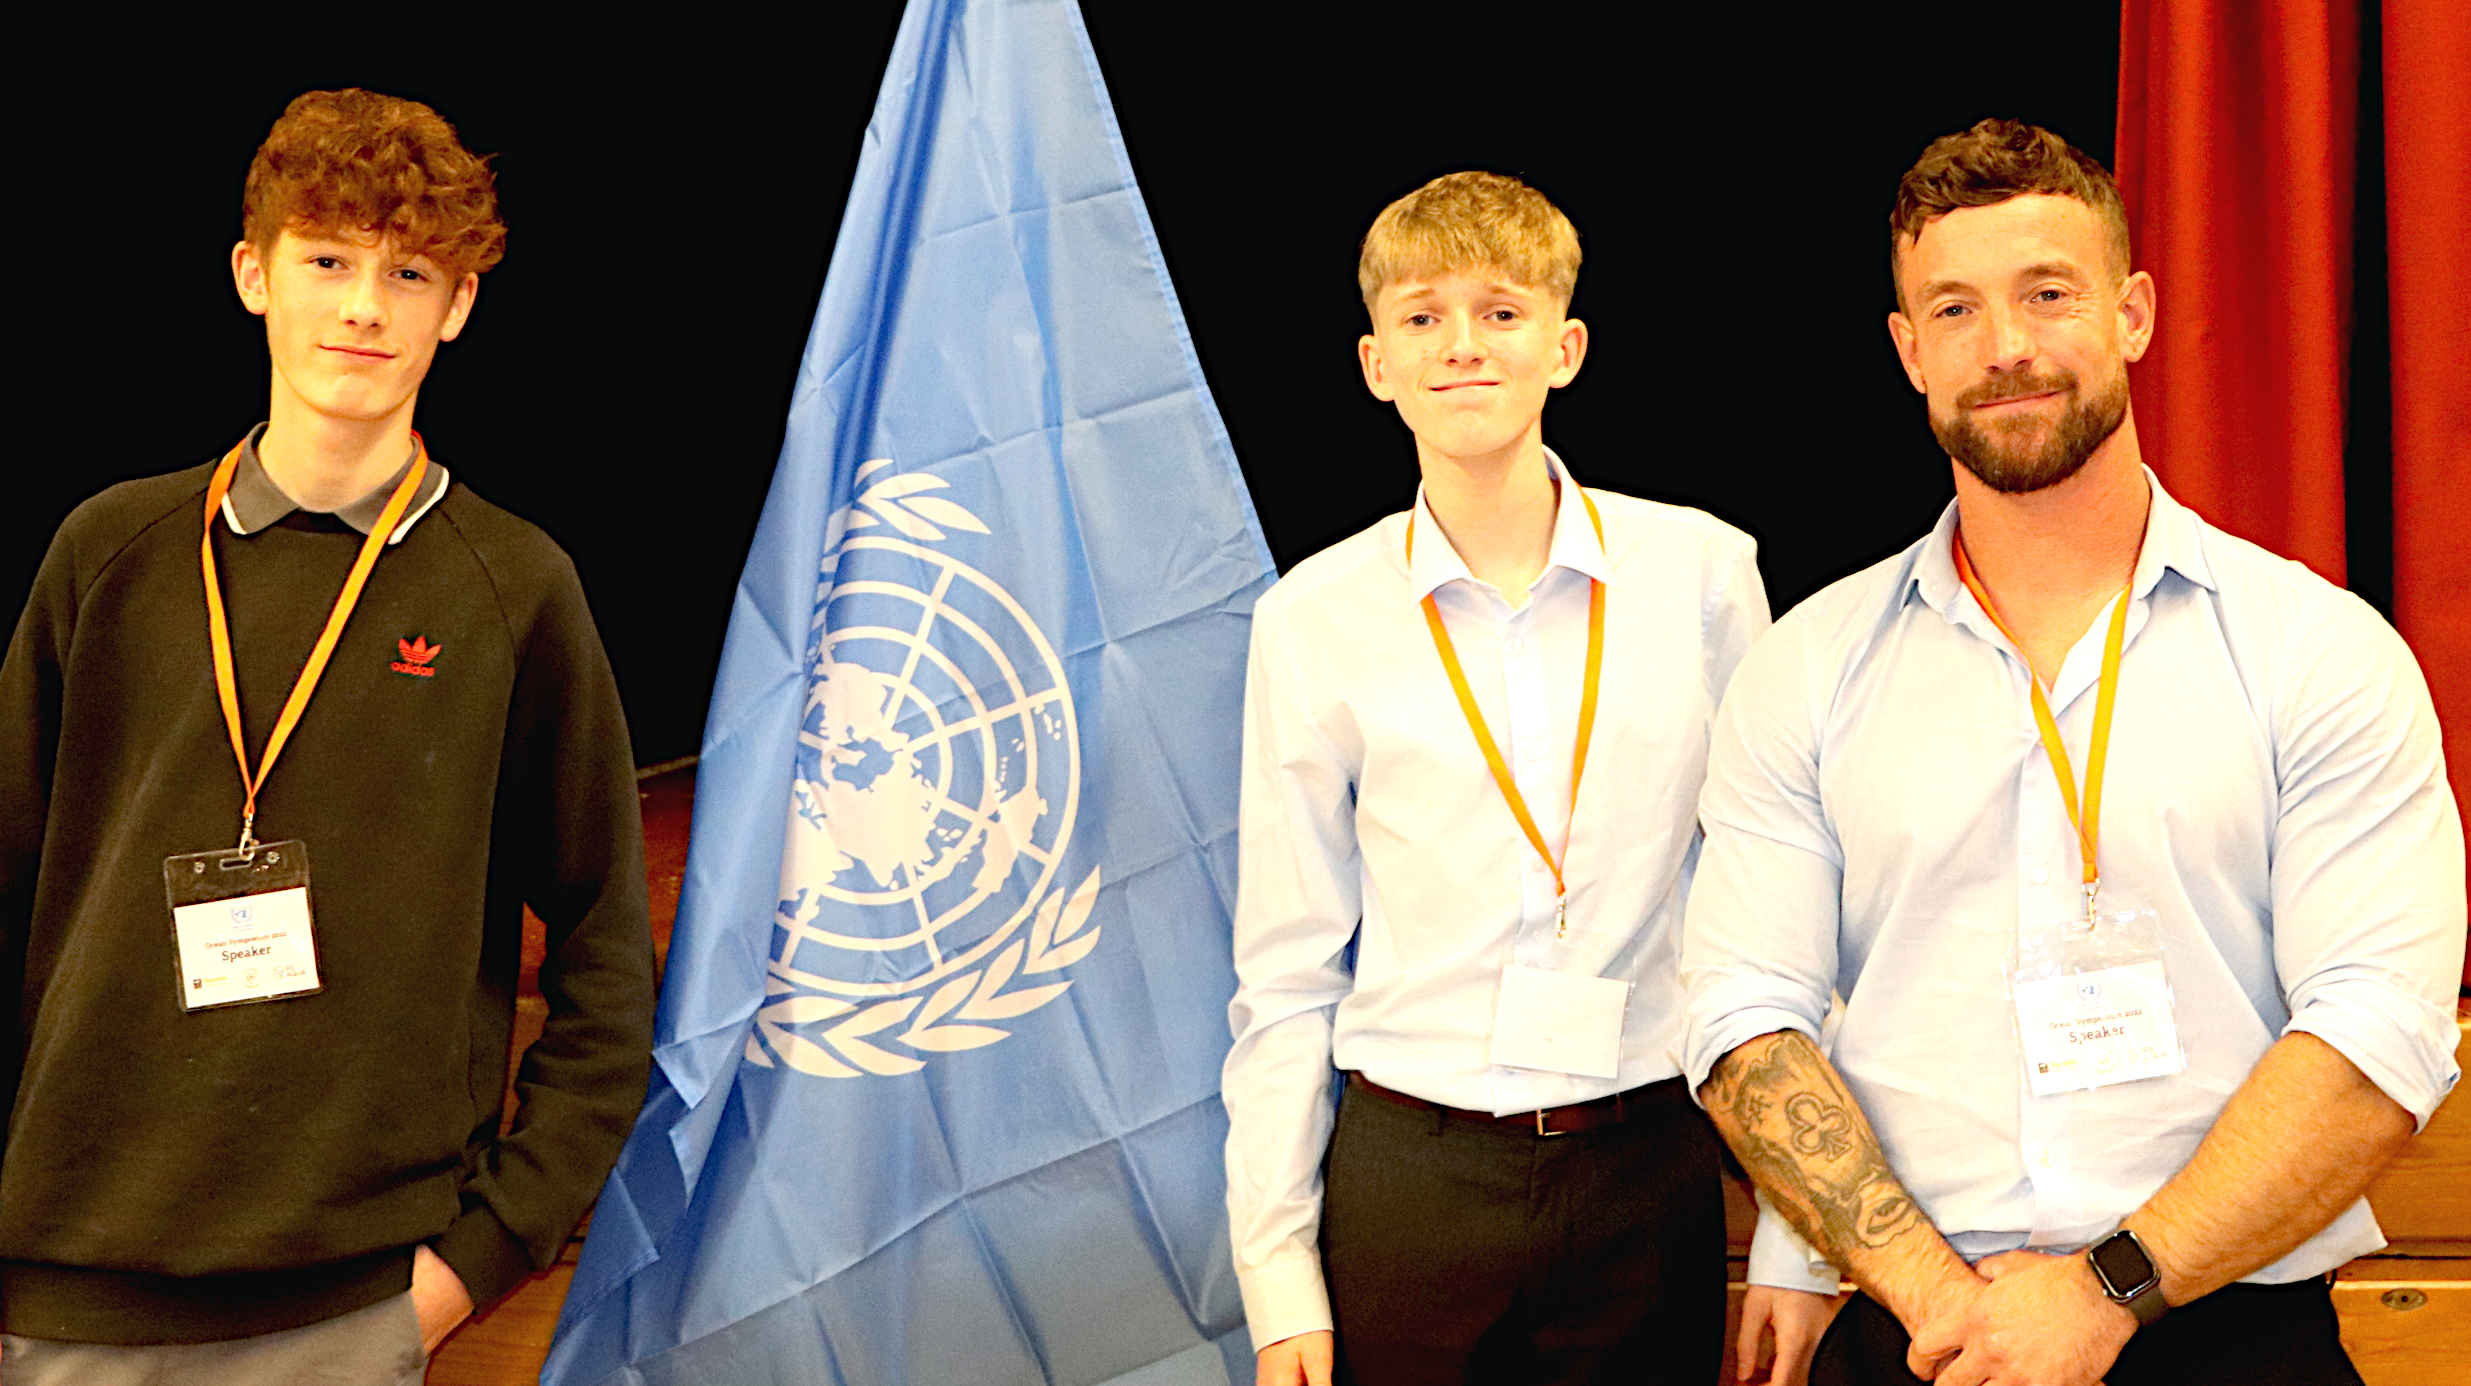 Leo, Ryan and Terry at the United Nations climate and ocean event in Bexhill, 19 November 2022